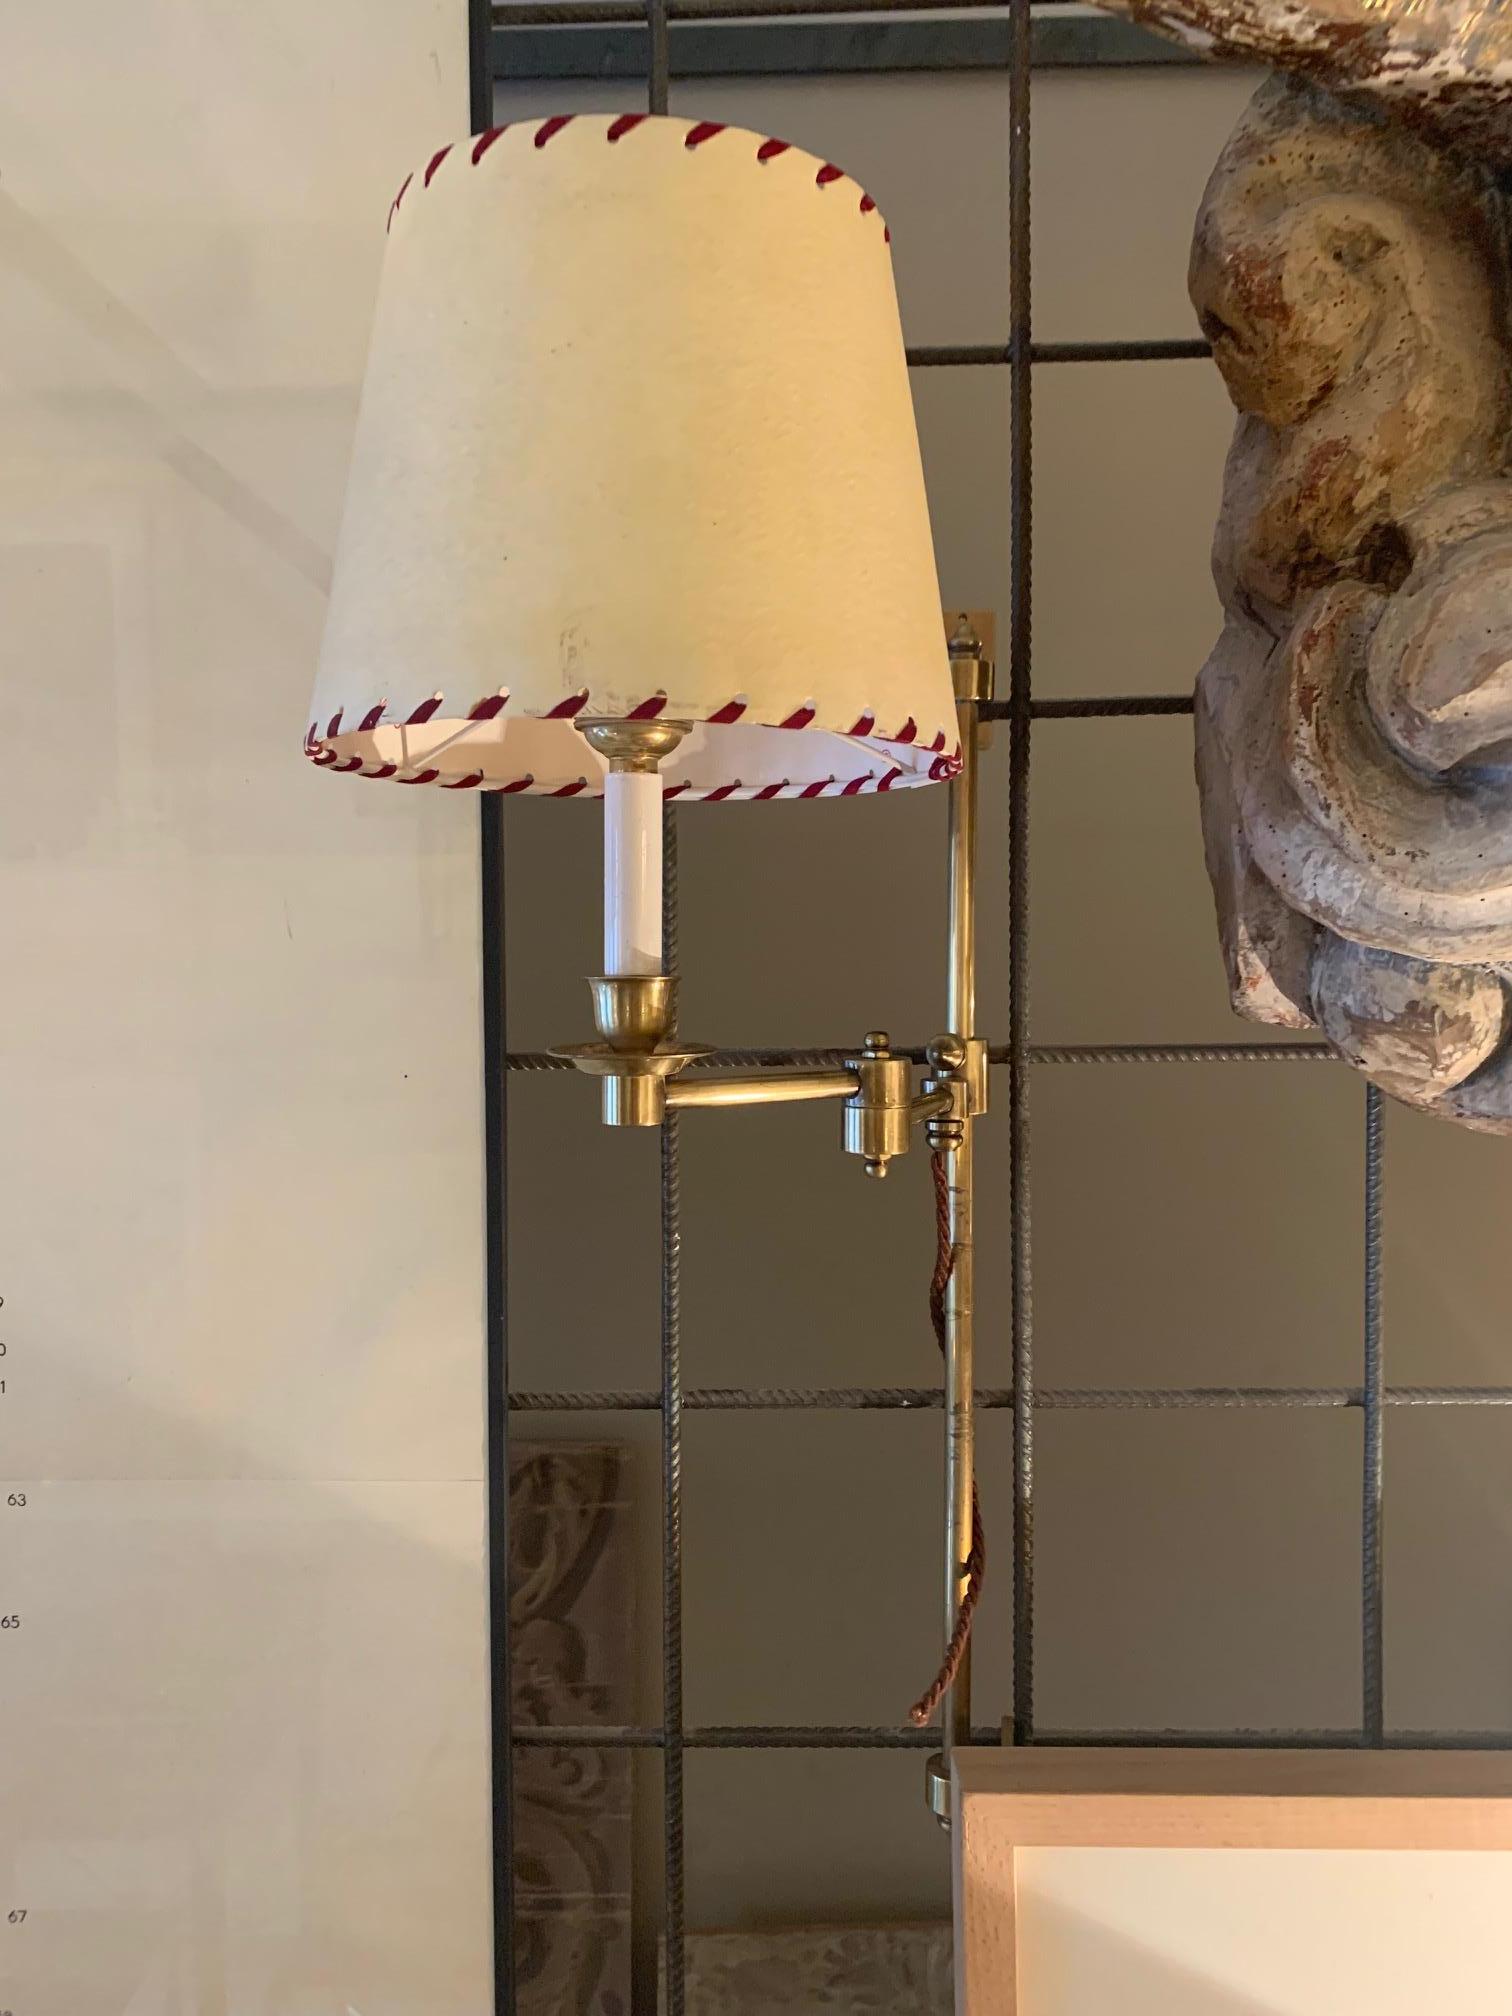 Impressive pair of very tall Spanish retractable sconces
Two-tone brass.

The sconces are retractable and also are able to swing, allowing you to adjust until you find the perfect position for your space. They come with two lampshades, the interior